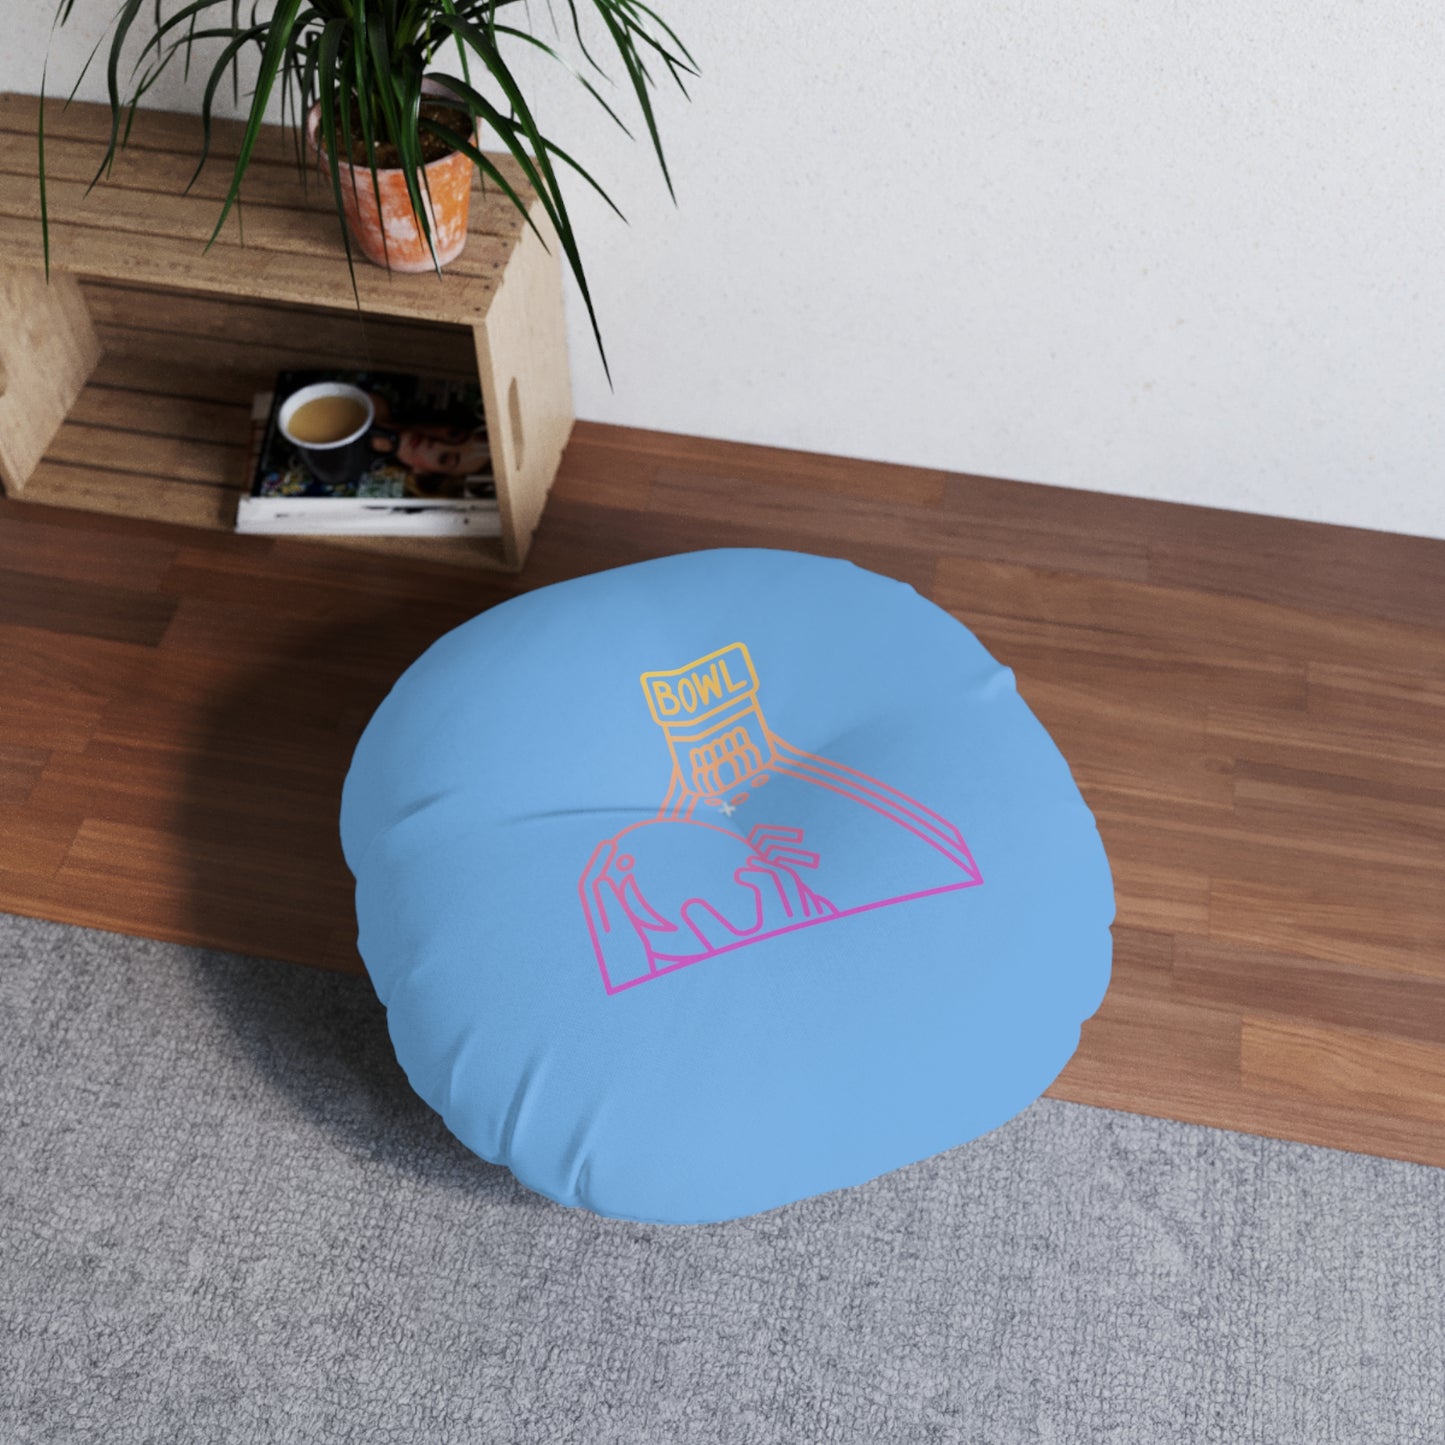 Tufted Floor Pillow, Round: Bowling Lite Blue